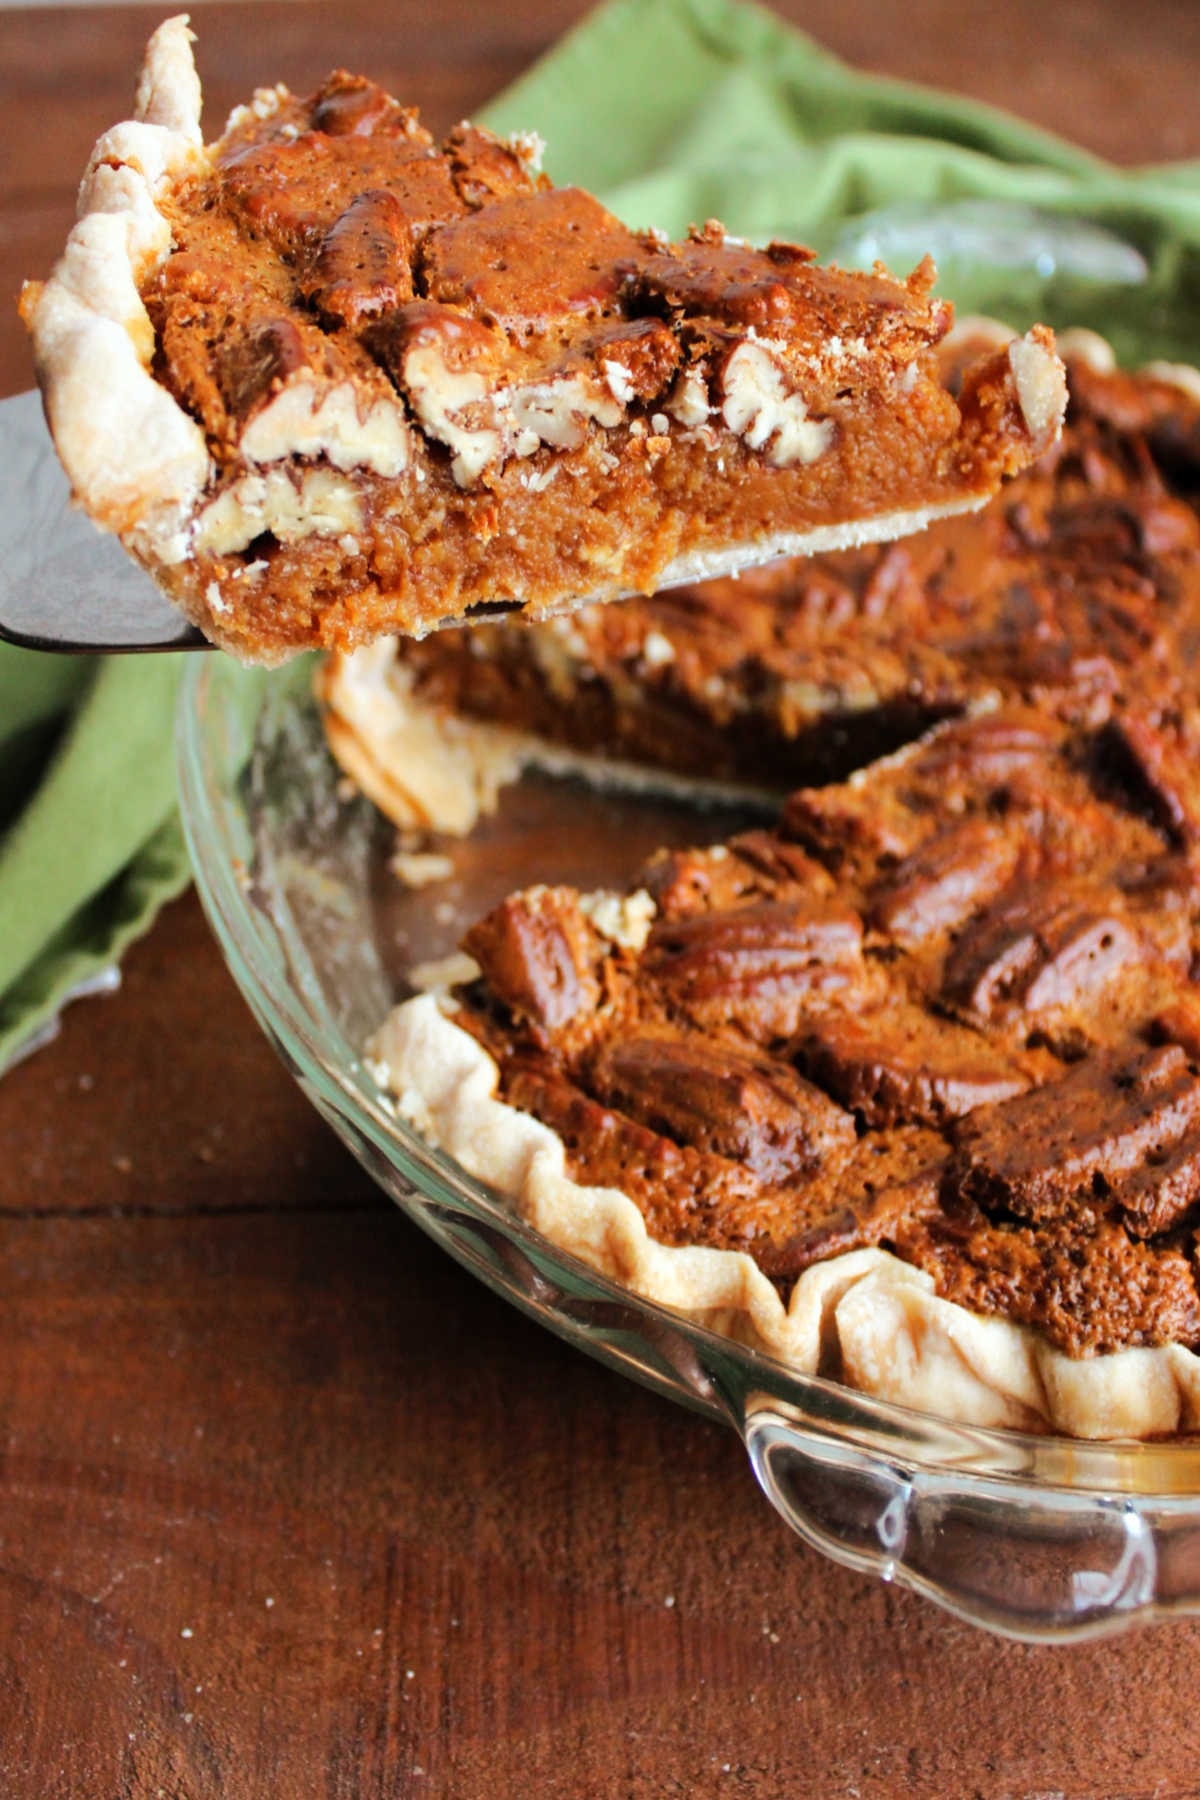 Lifting a slice of caramel pecan pie out of the pan showing the layer of pecans and the caramel filling.